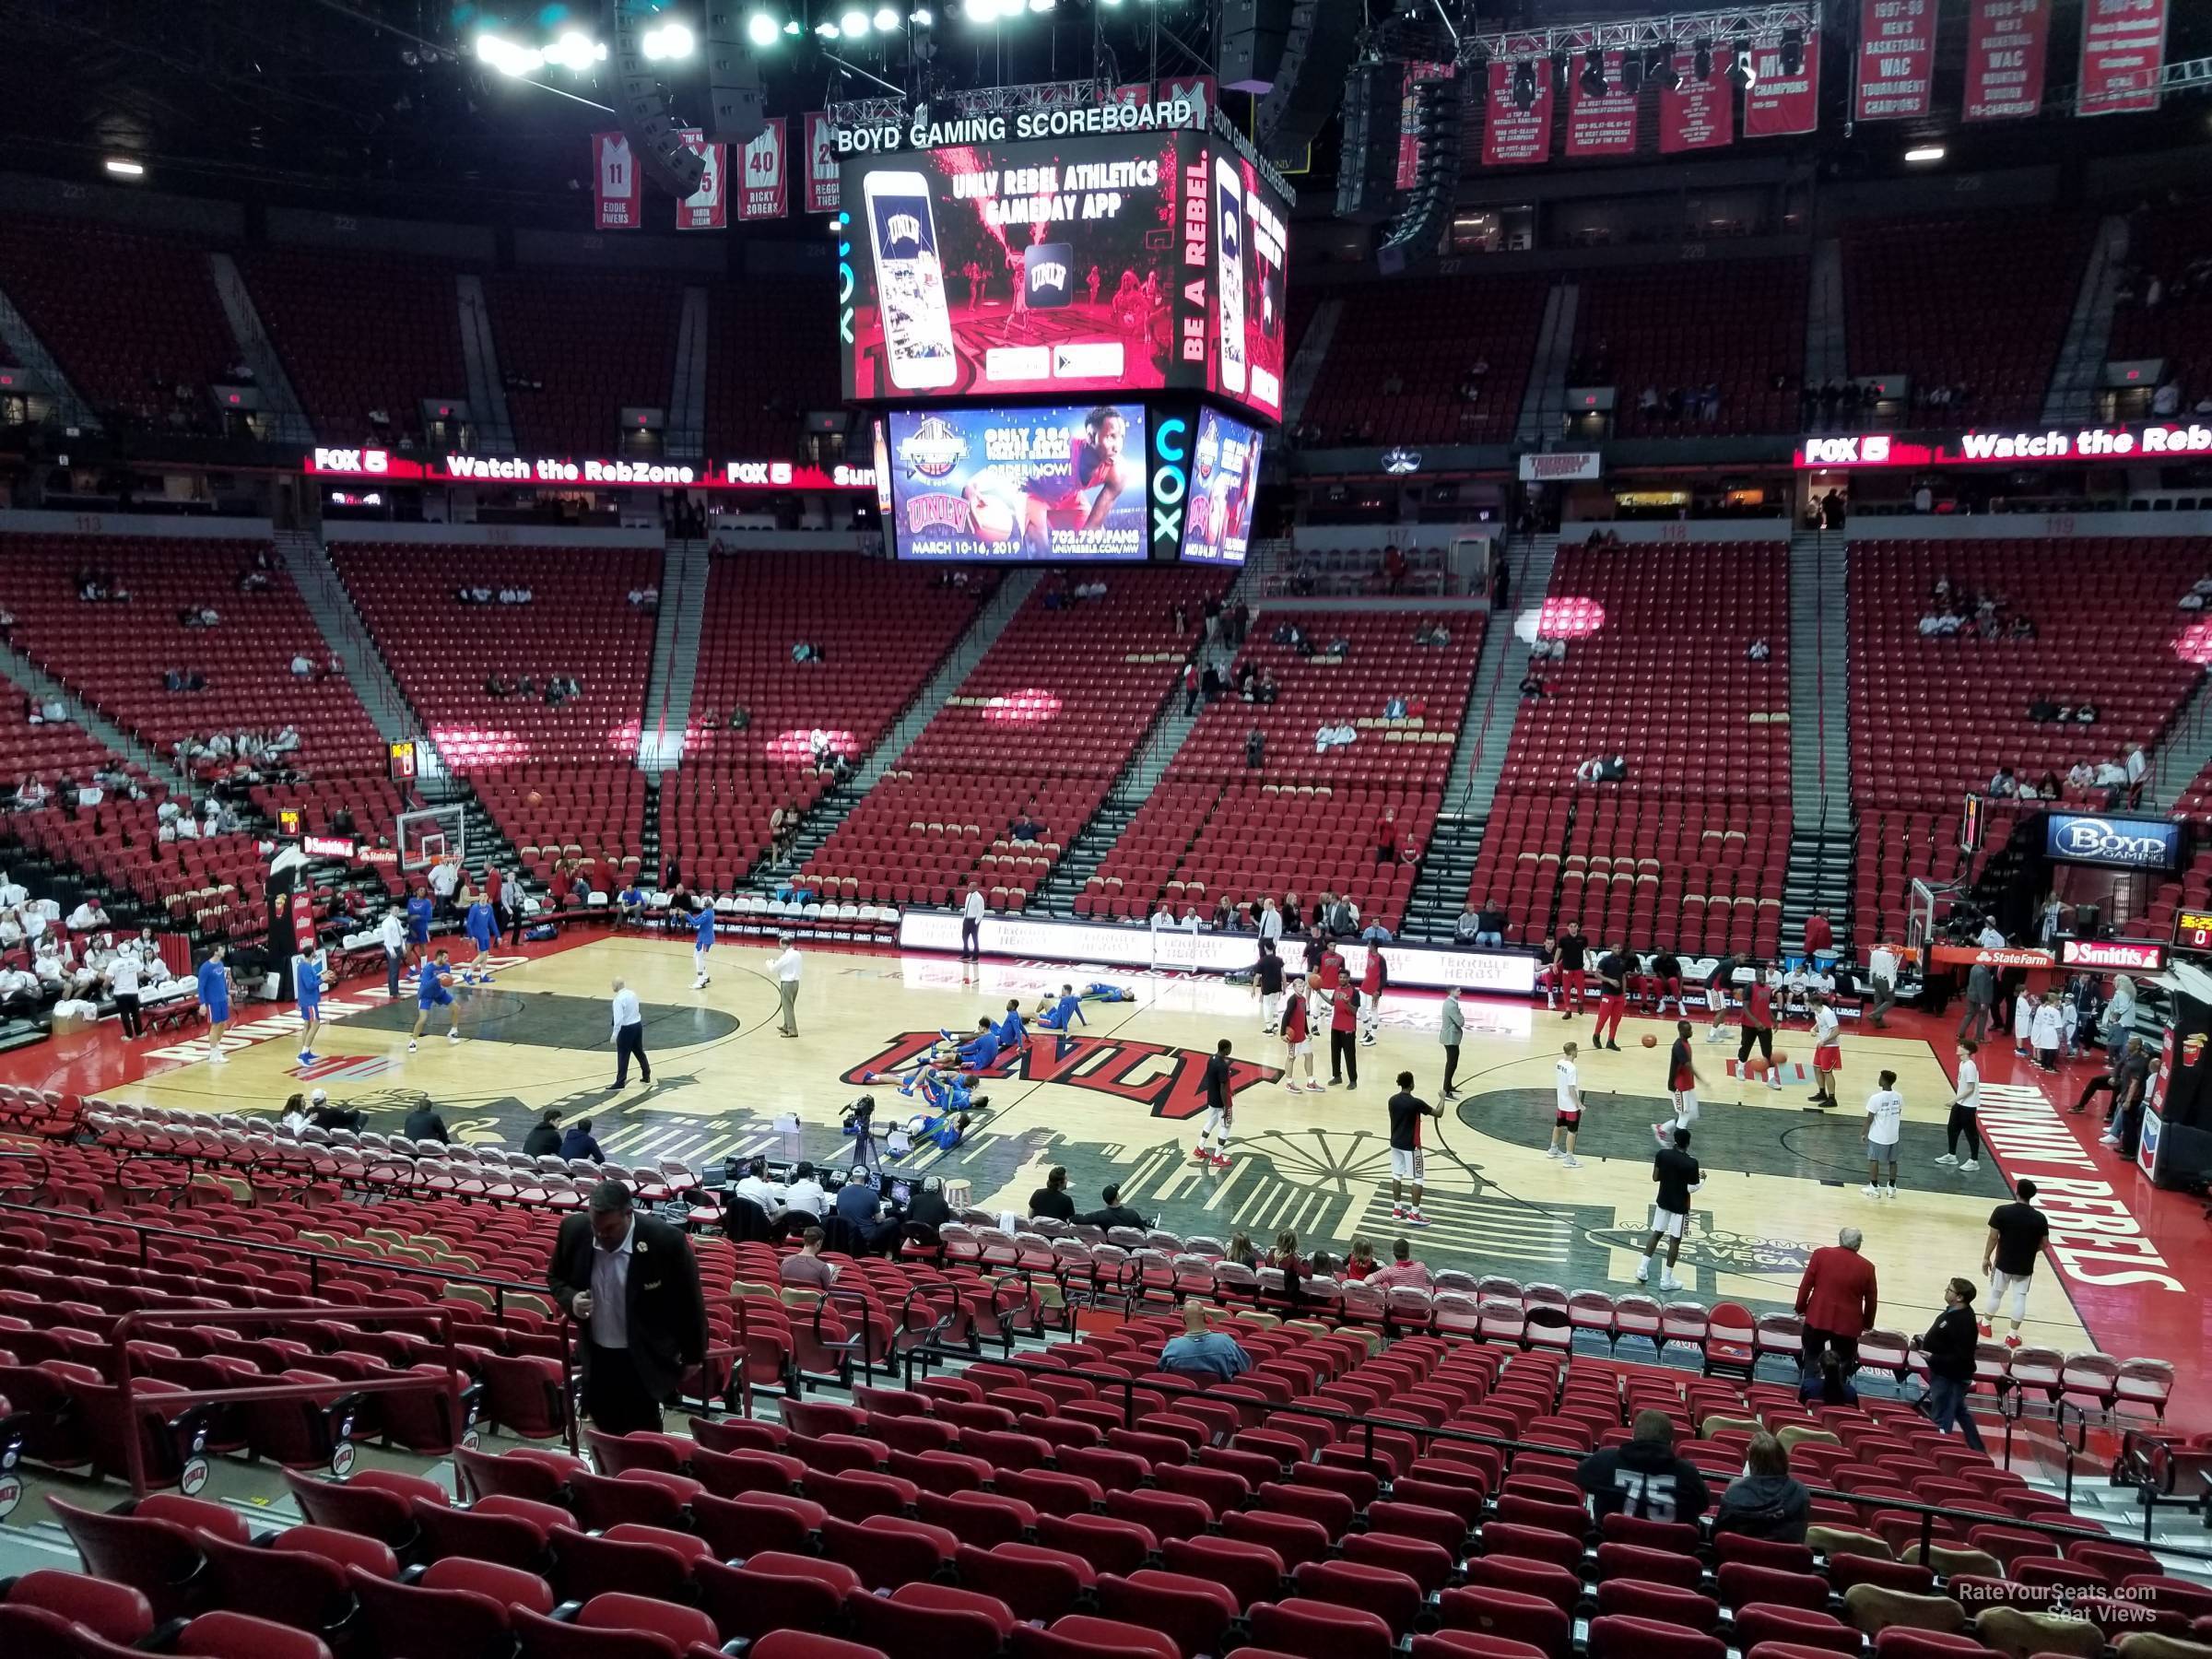 Section 105 at Thomas and Mack Center - RateYourSeats.com